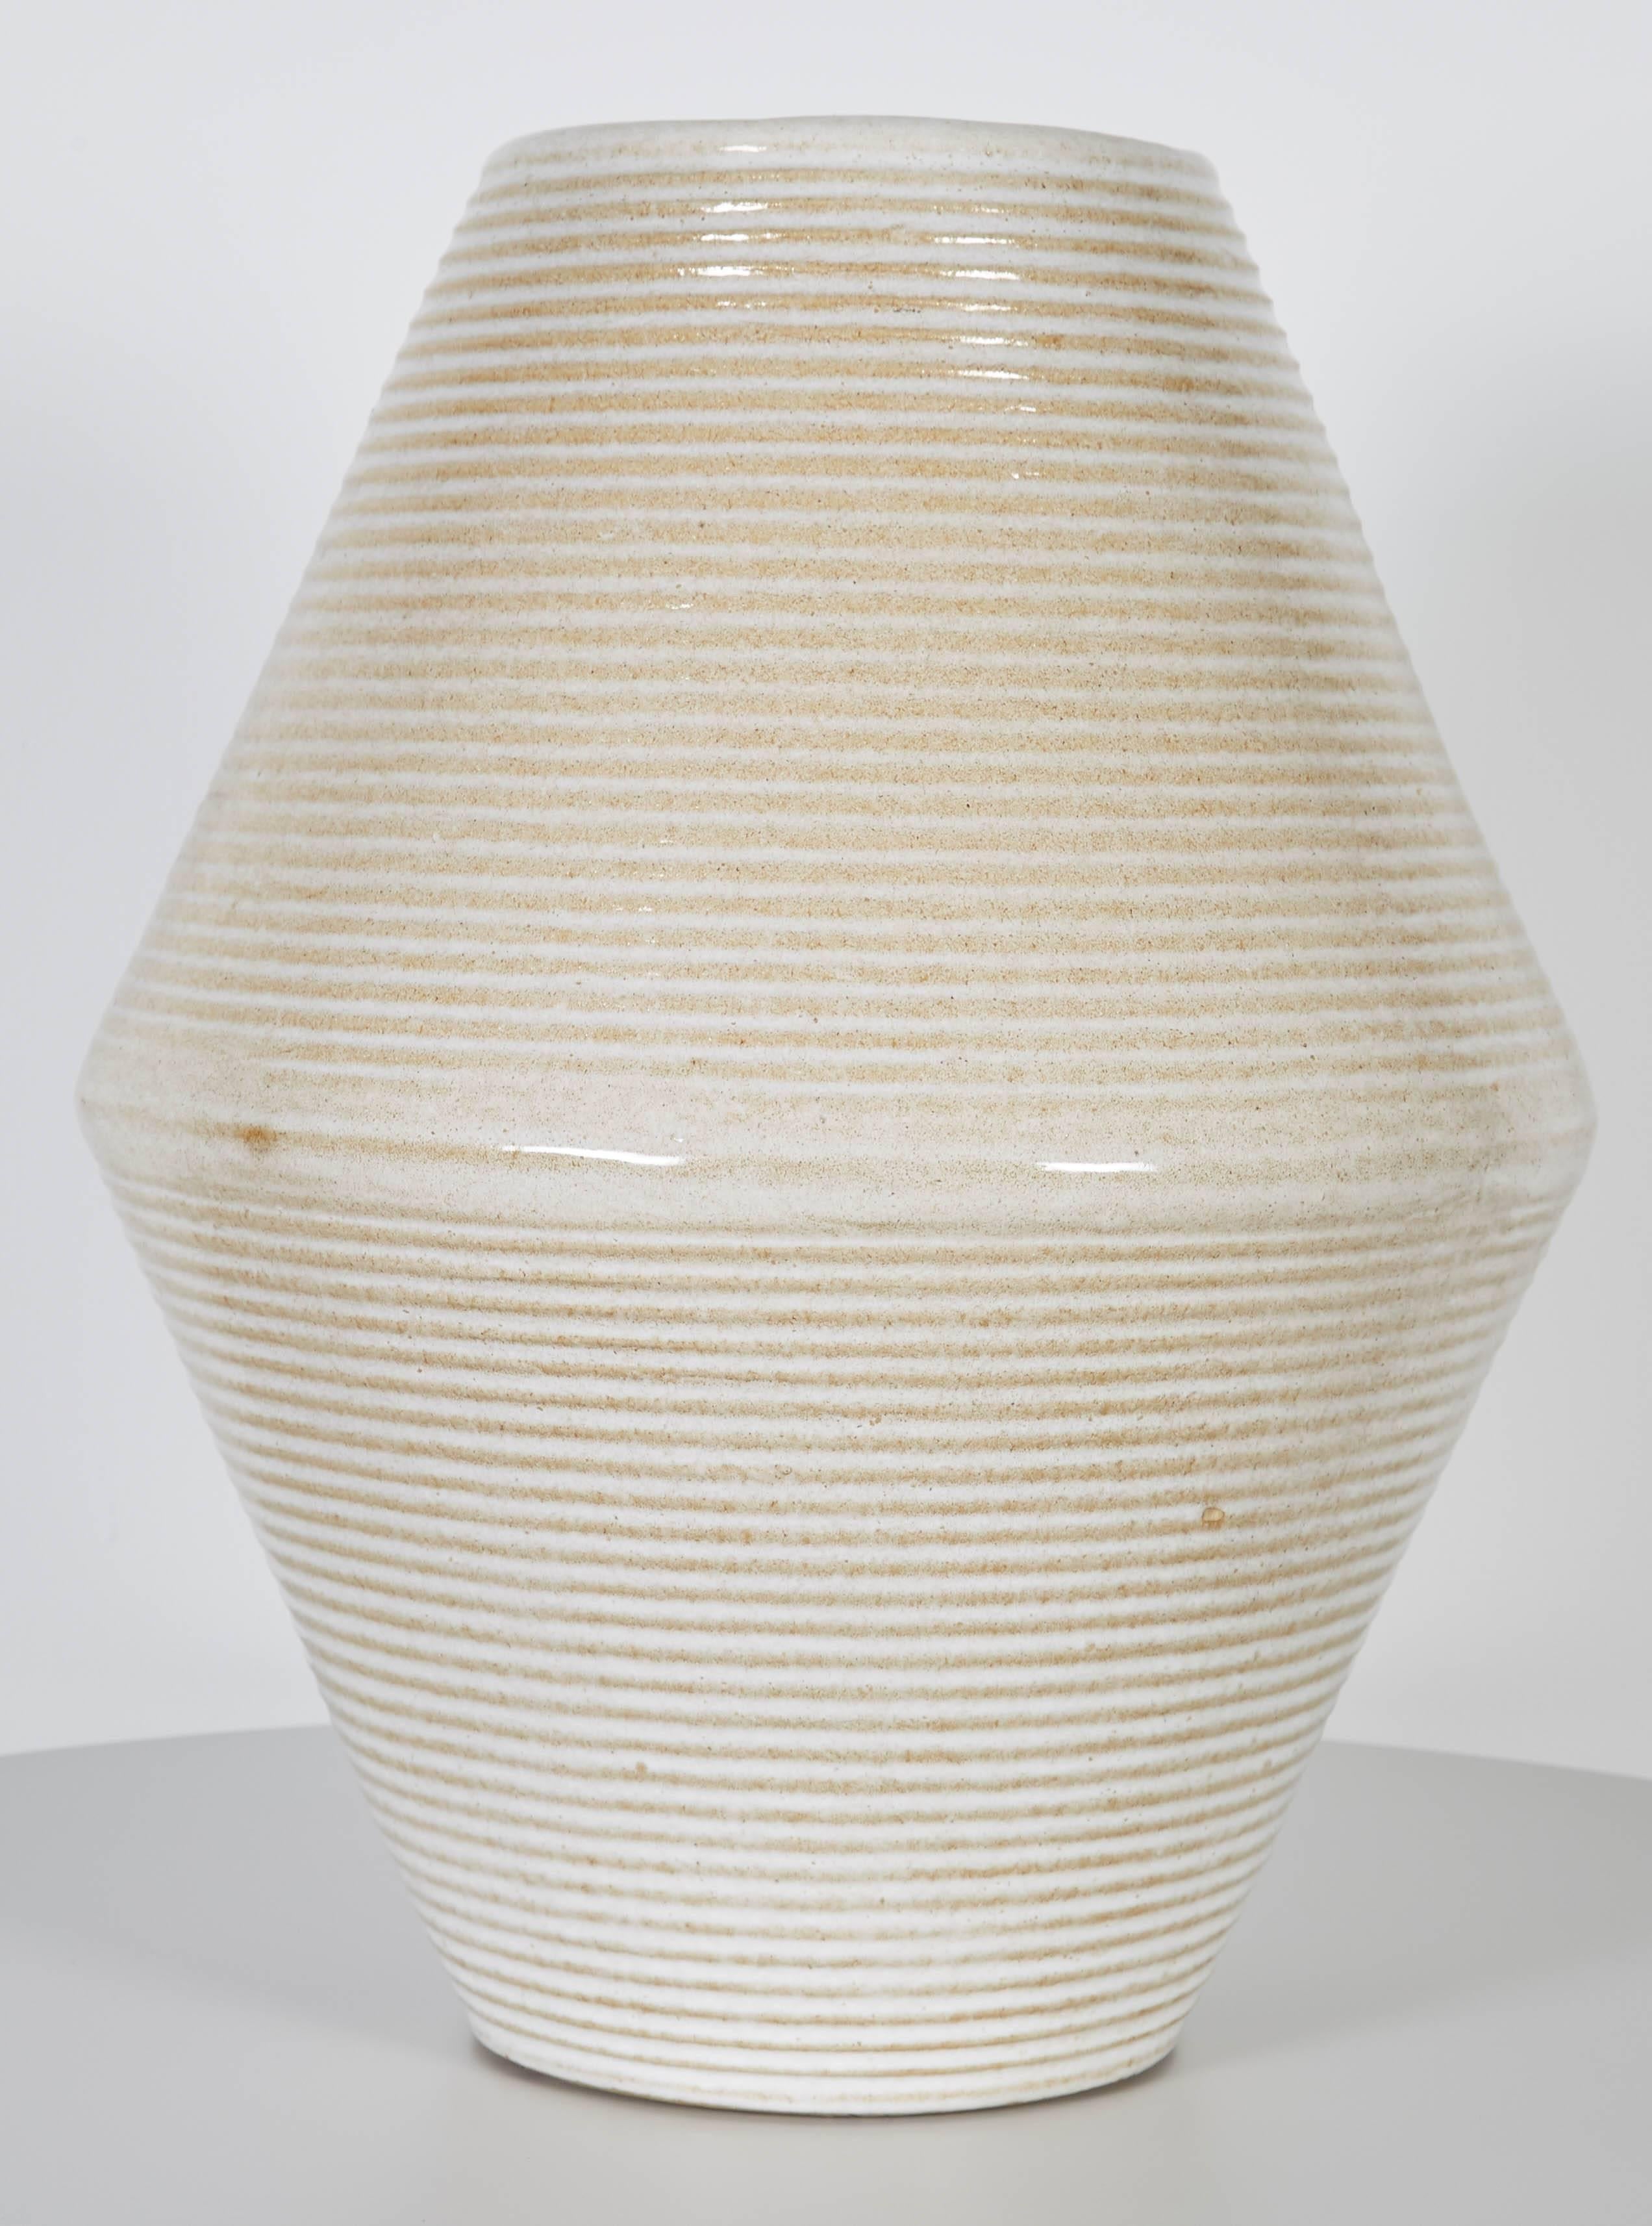 American Ribbed Architectural Pottery Vase